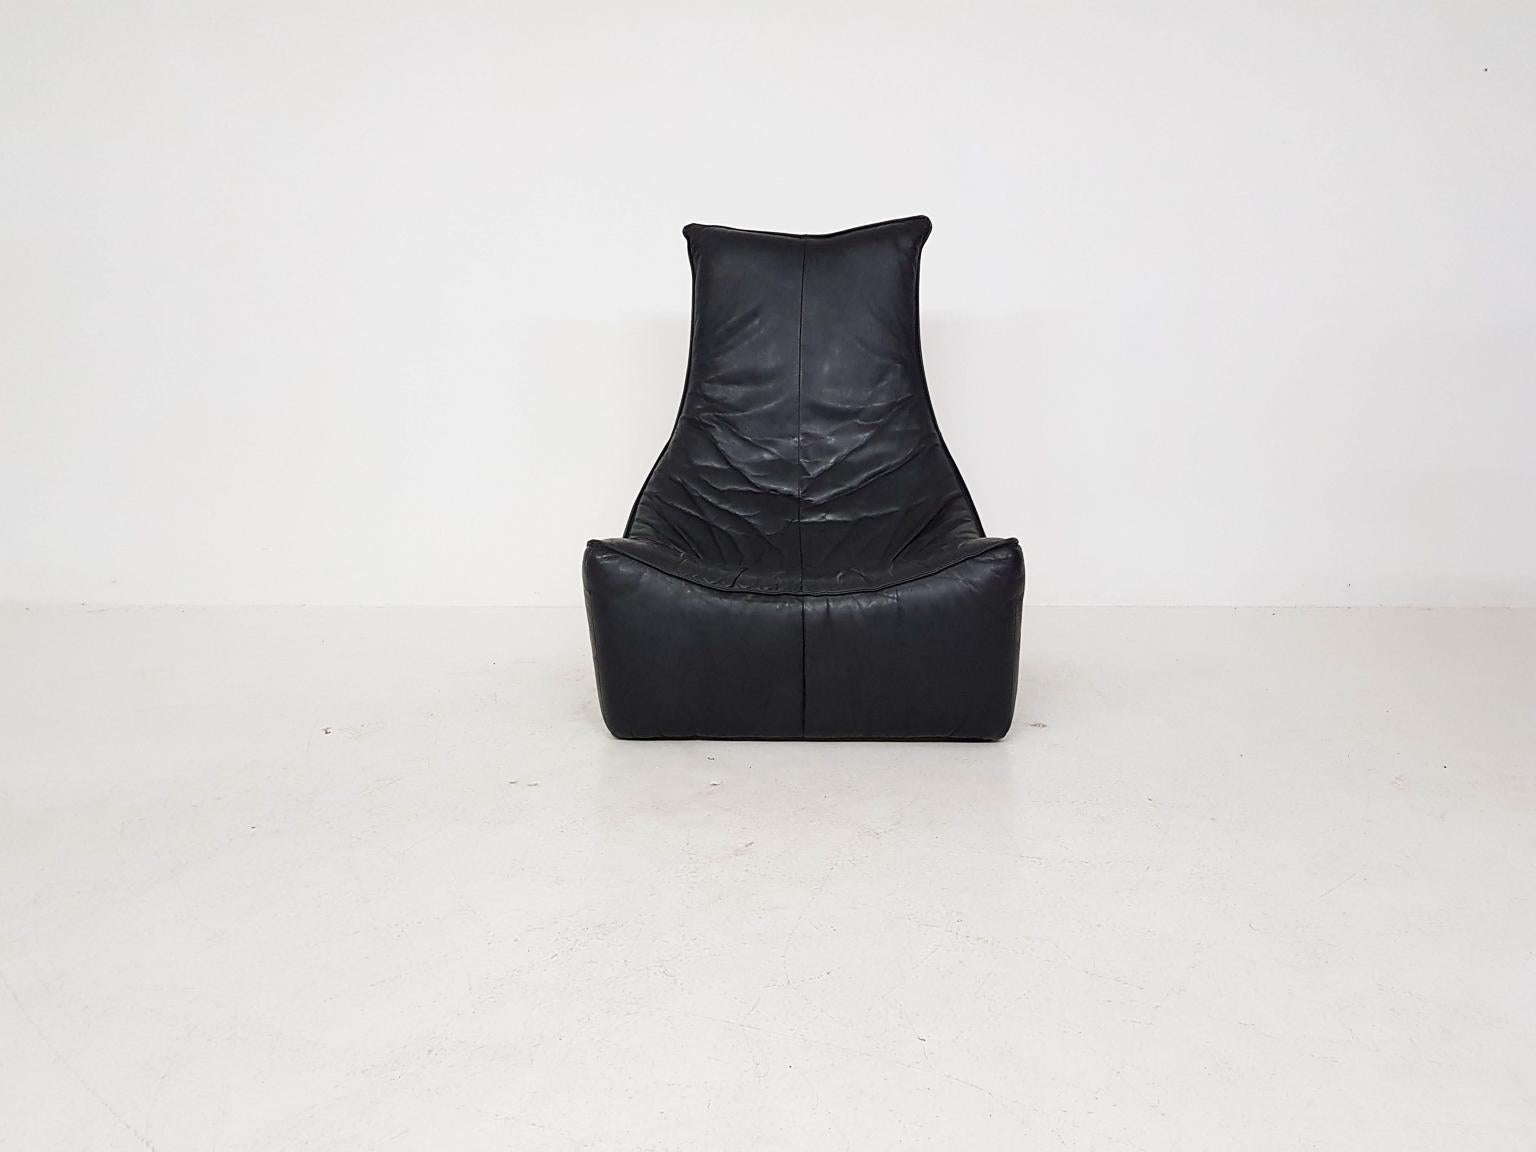 Black leather Brutalist lounge chair by Dutch designer Gerard Van Den Berg for Montis, the Netherlands 1970s.

This is one of the most iconic lounge chairs of the Dutch late midcentury. Gerard Van Den Berg designed his 